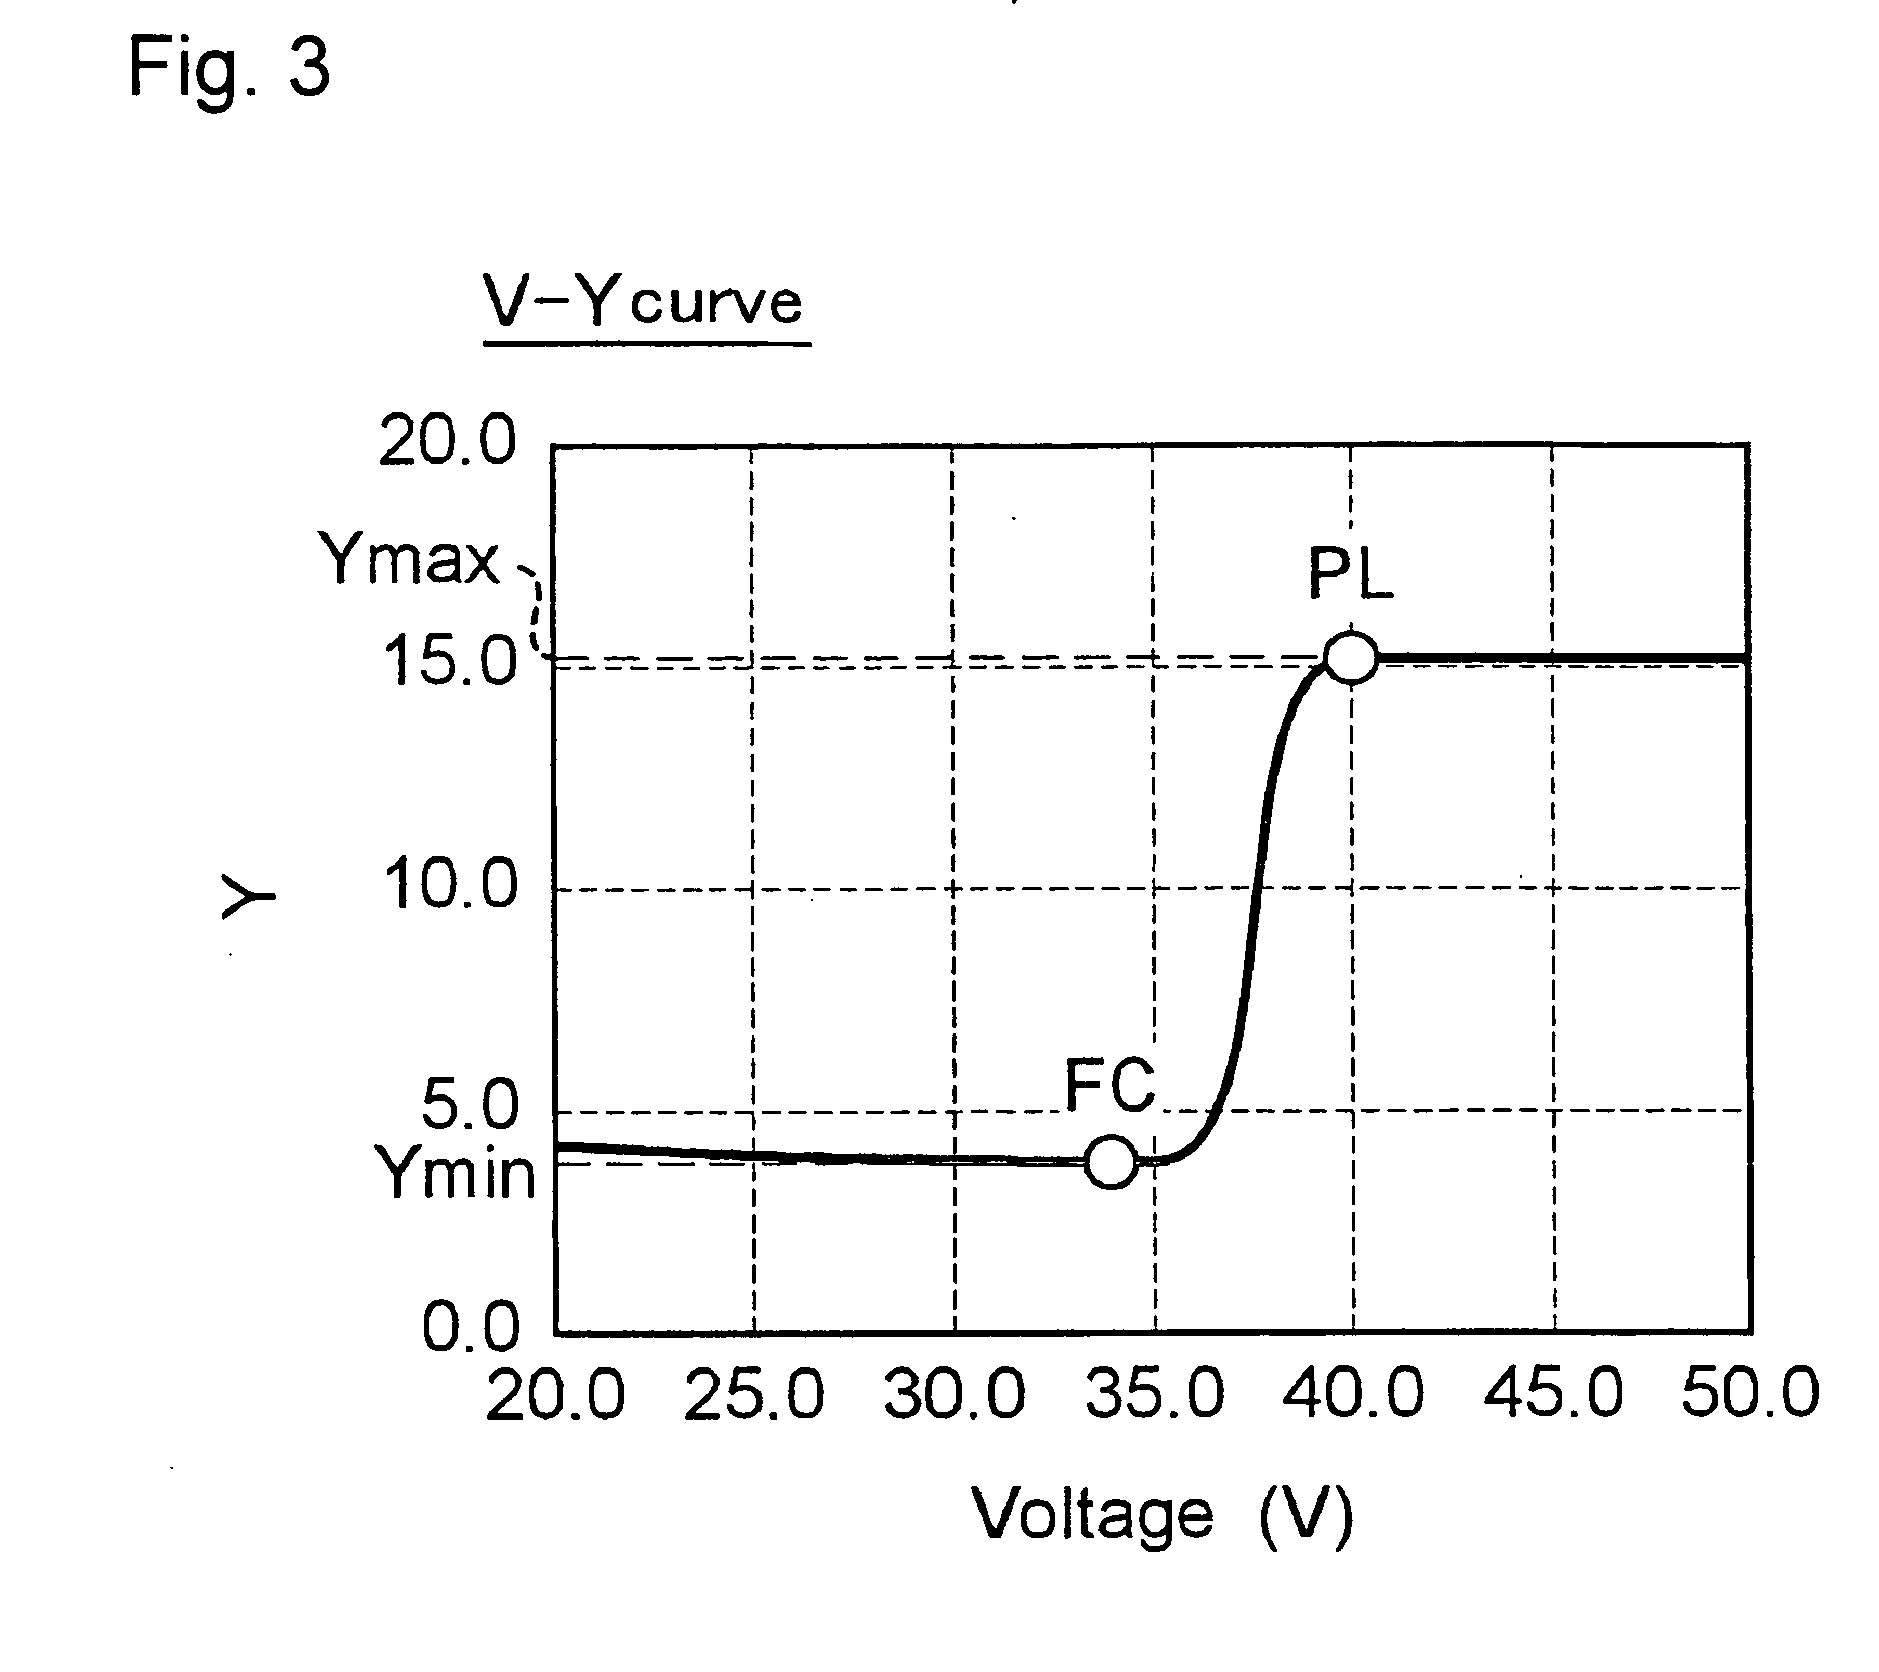 Liquid crystal composition containing at least two kinds of gelling agents and liquid crystal display device using the same